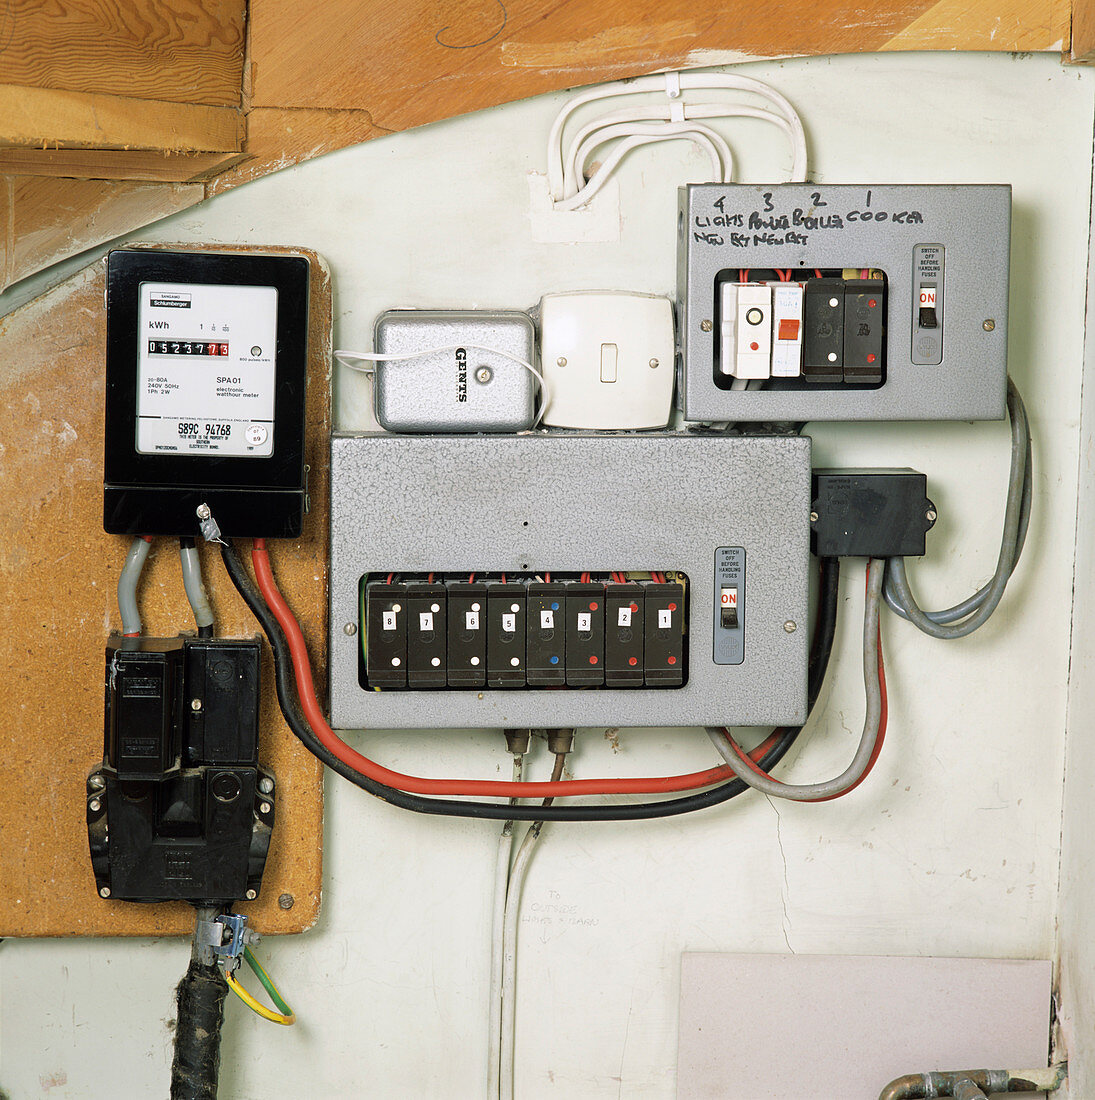 Electricity meter and fuse boxes